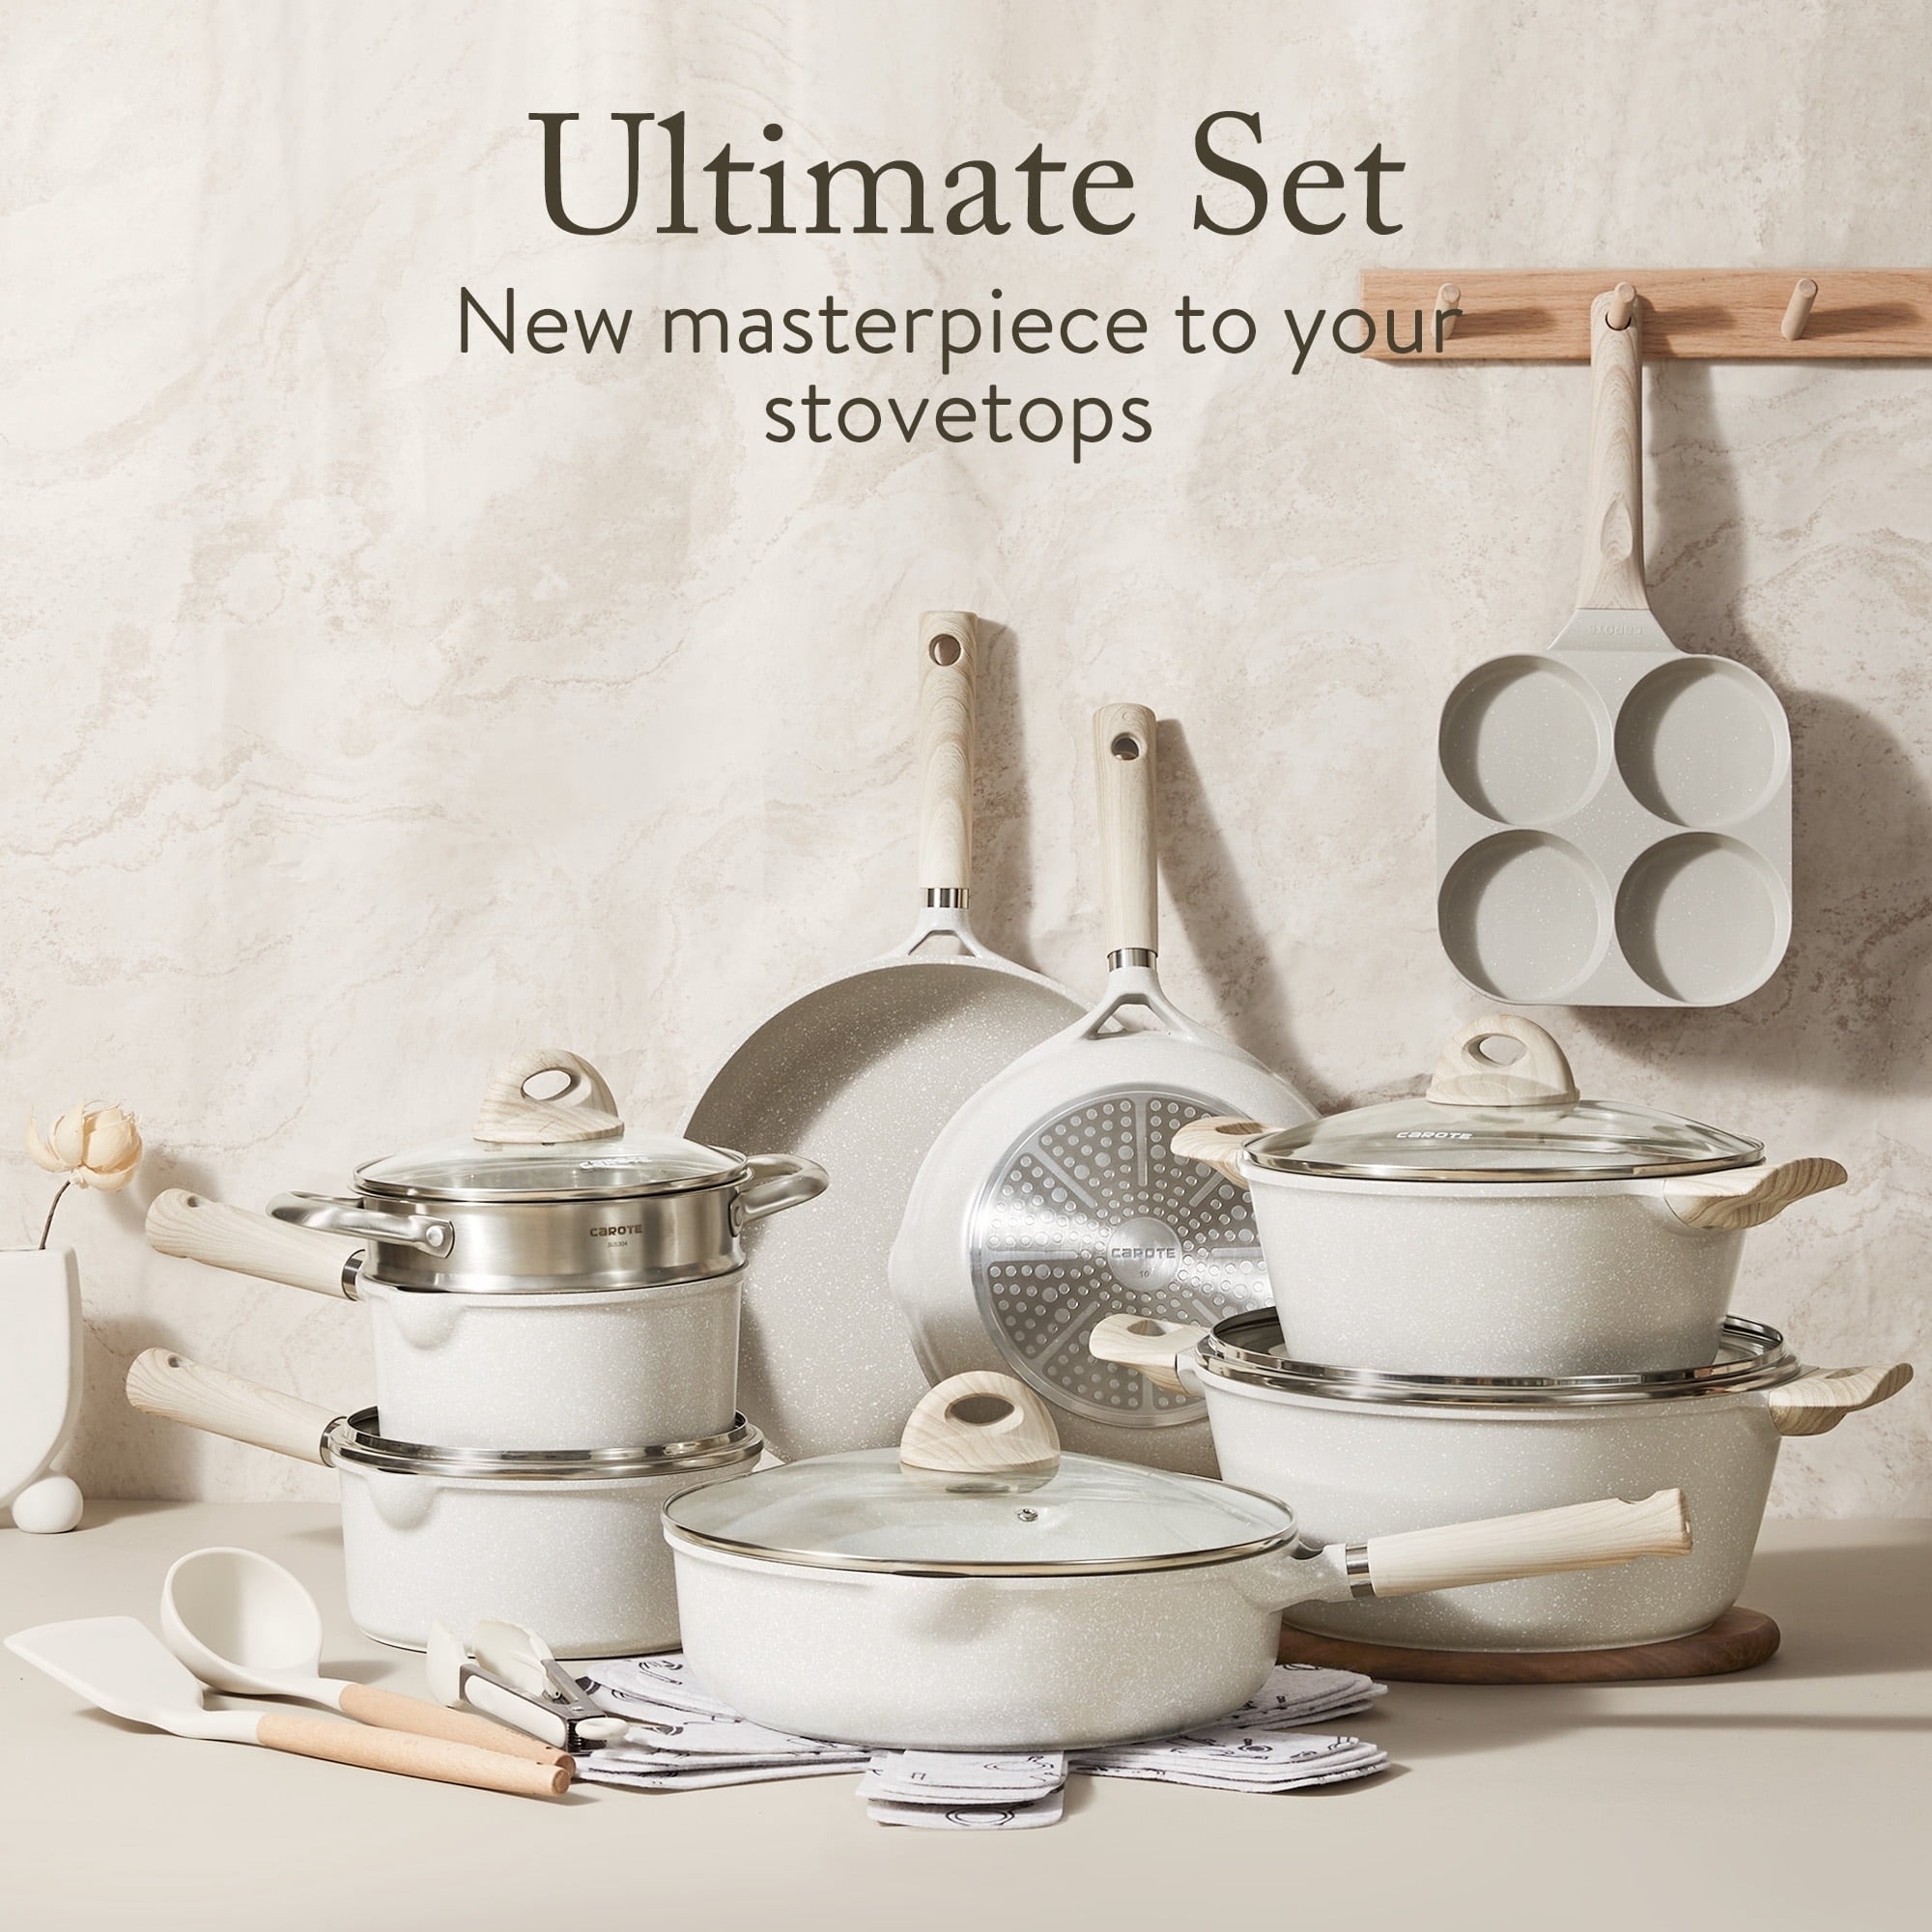 Cookware set with multiple pots, pans, and utensils displayed on a wooden surface. Text reads: &quot;Ultimate Set - New masterpiece to your stovetops.&quot;